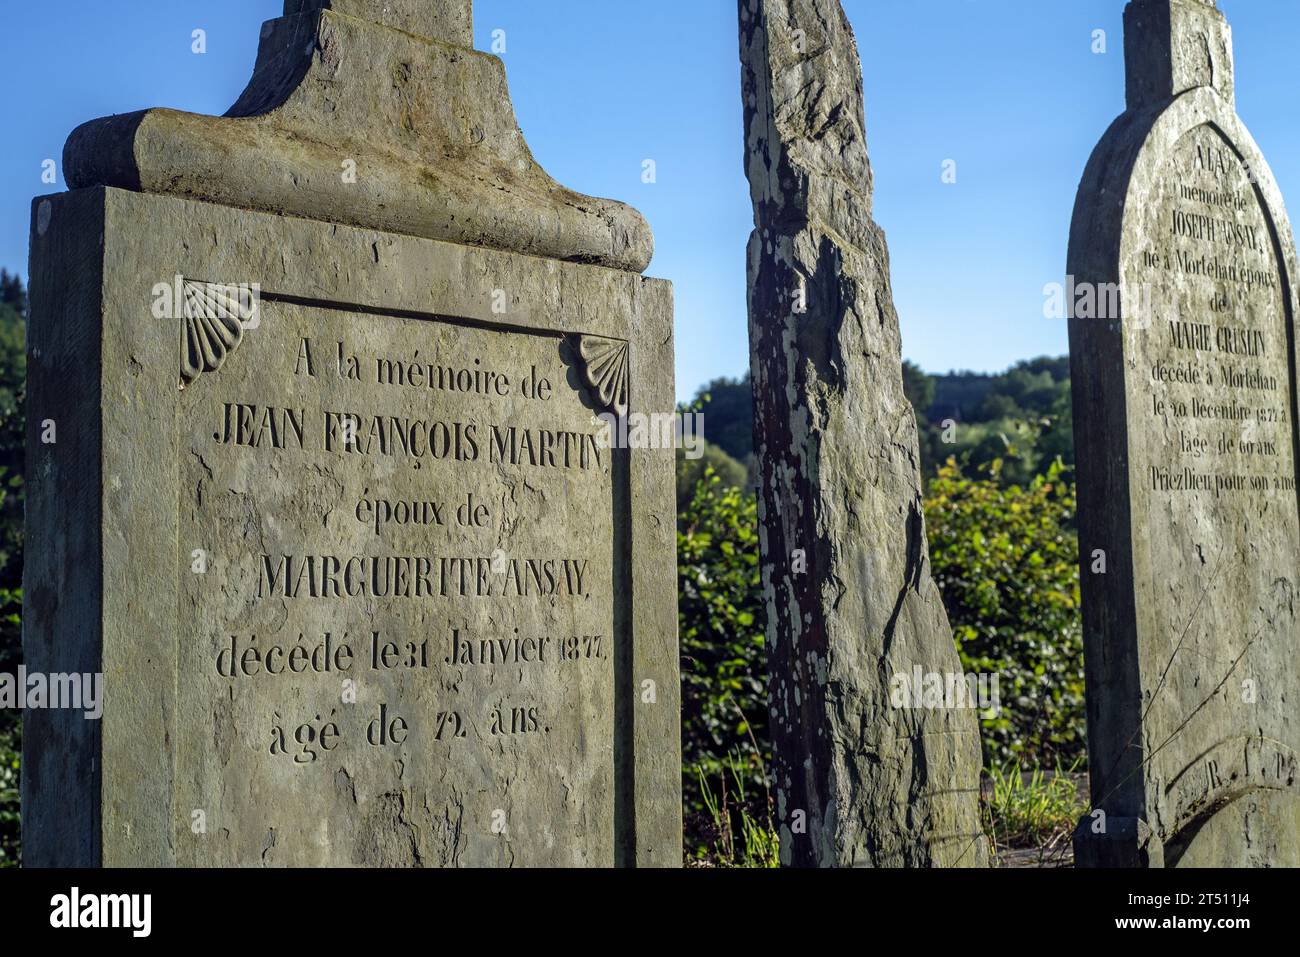 19th century headstones at Le Vieux Cimetière, old cemetery along the Semois river in the village Mortehan, Bertrix, Luxembourg, Ardennes, Belgium Stock Photo